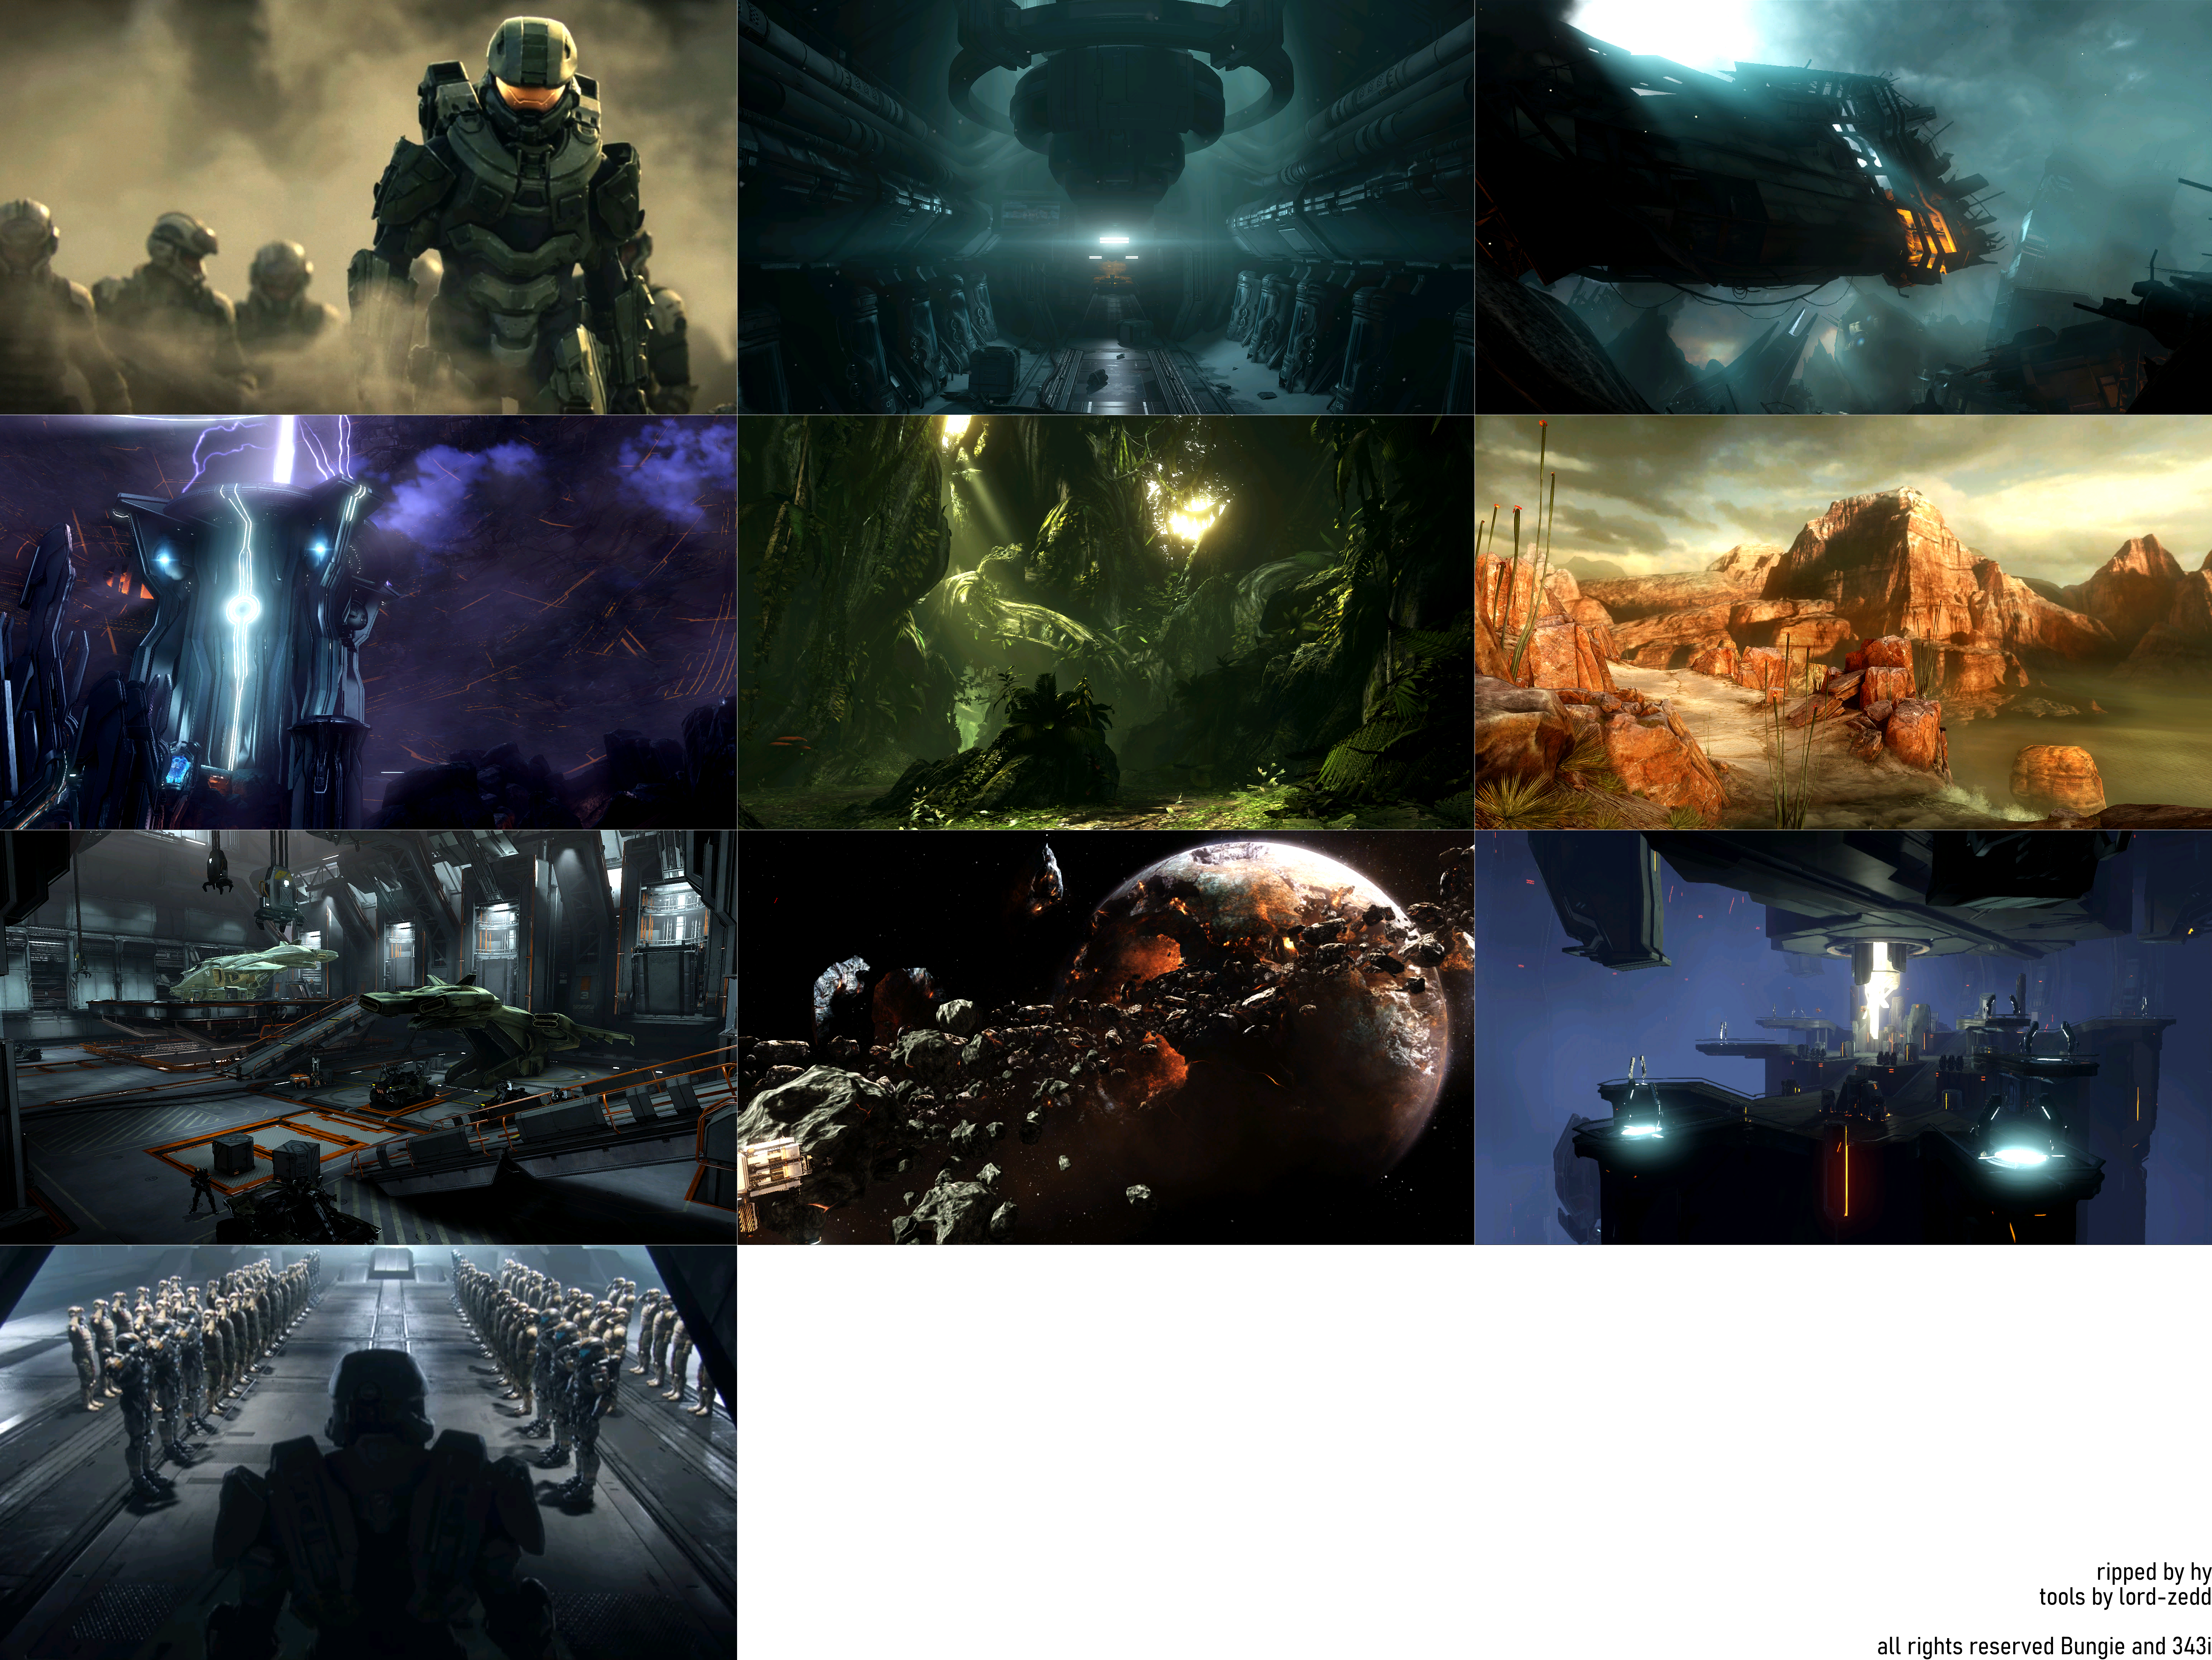 Halo: The Master Chief Collection - Halo 4 Campaign Level Loading Screens